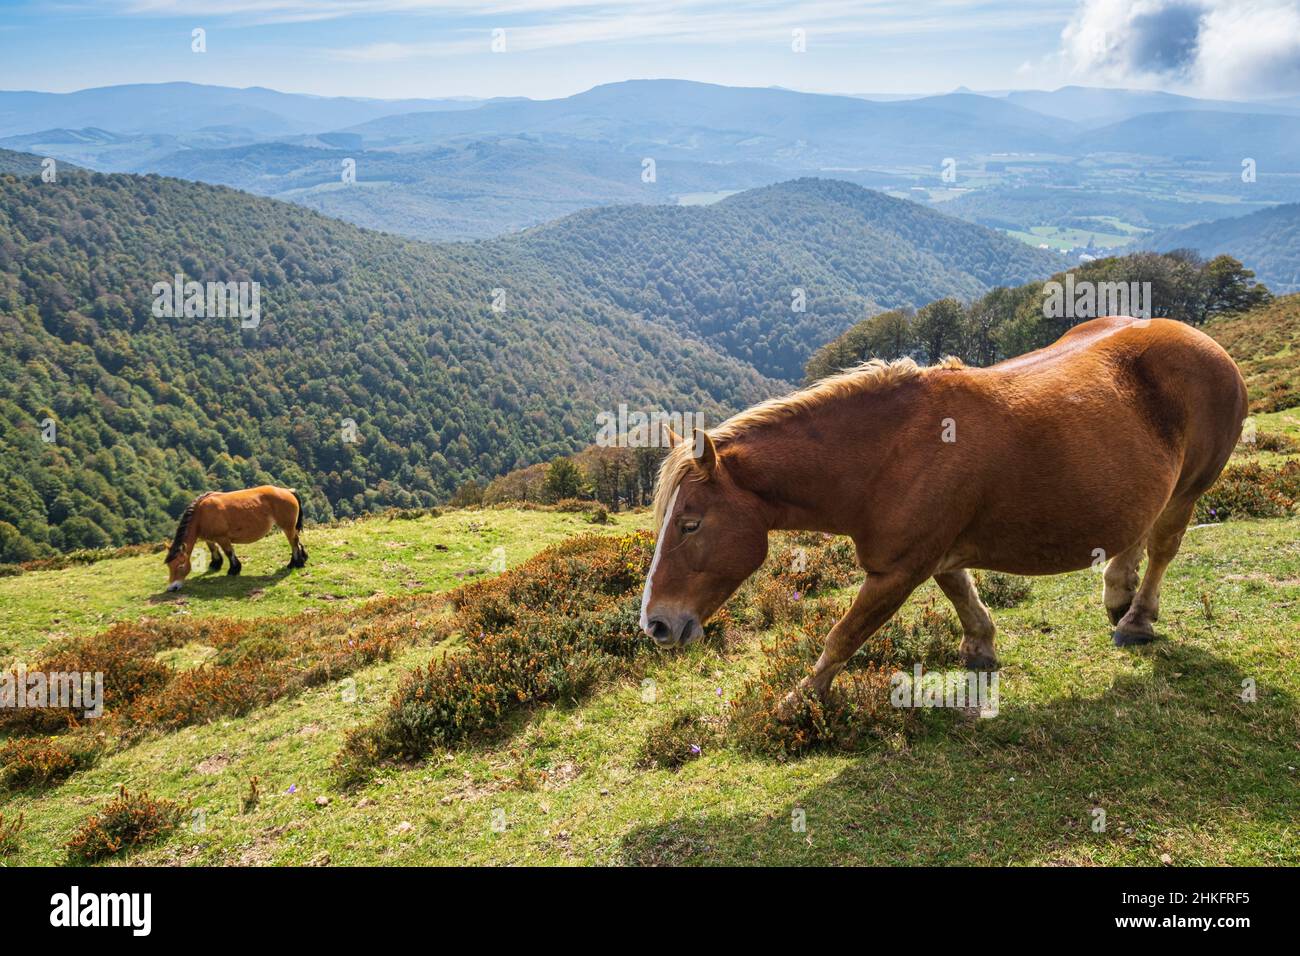 Spain, Navarre, Camino Francés, Spanish route of the pilgrimage to Santiago de Compostela, listed as a UNESCO World Heritage Site, horses going down towards Roncesvalles Stock Photo